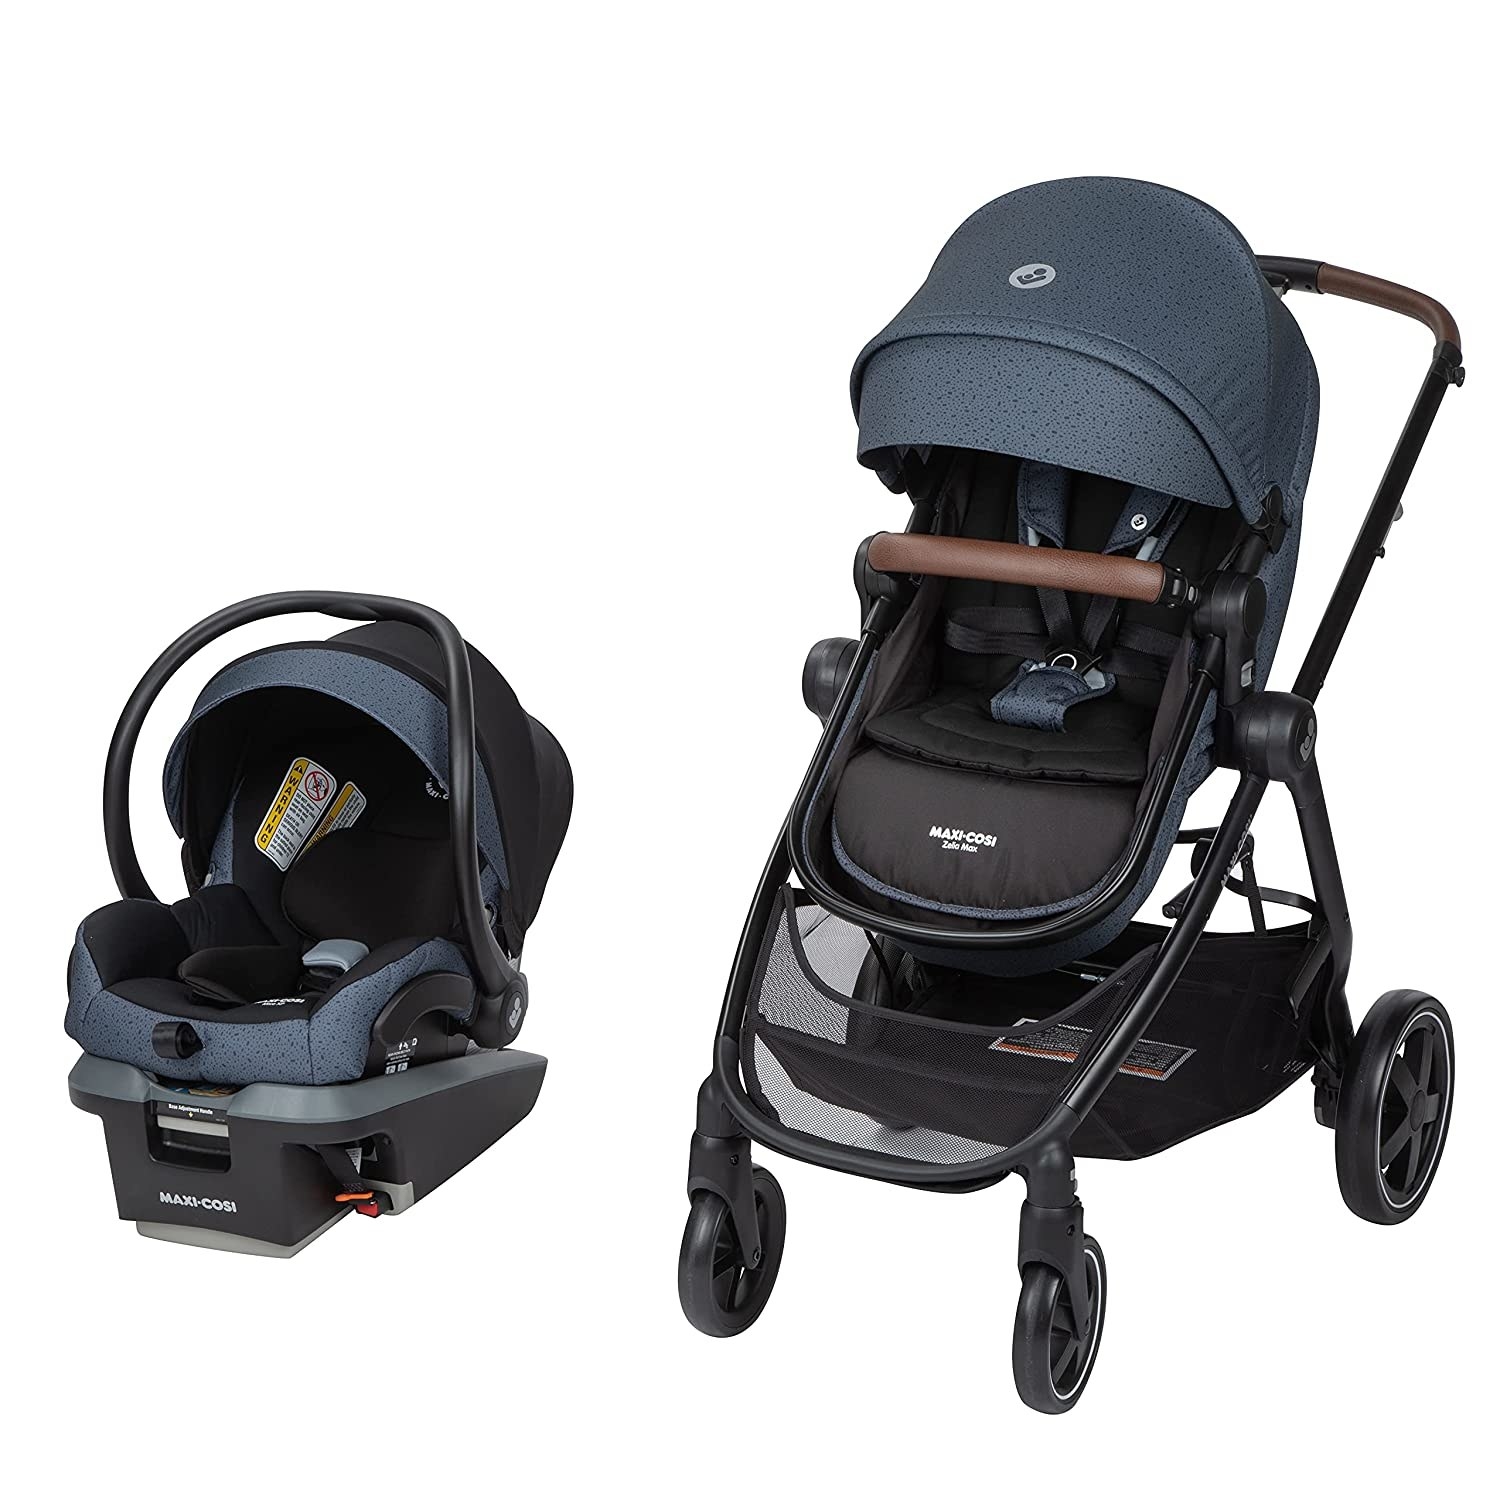 A stroller and car seat